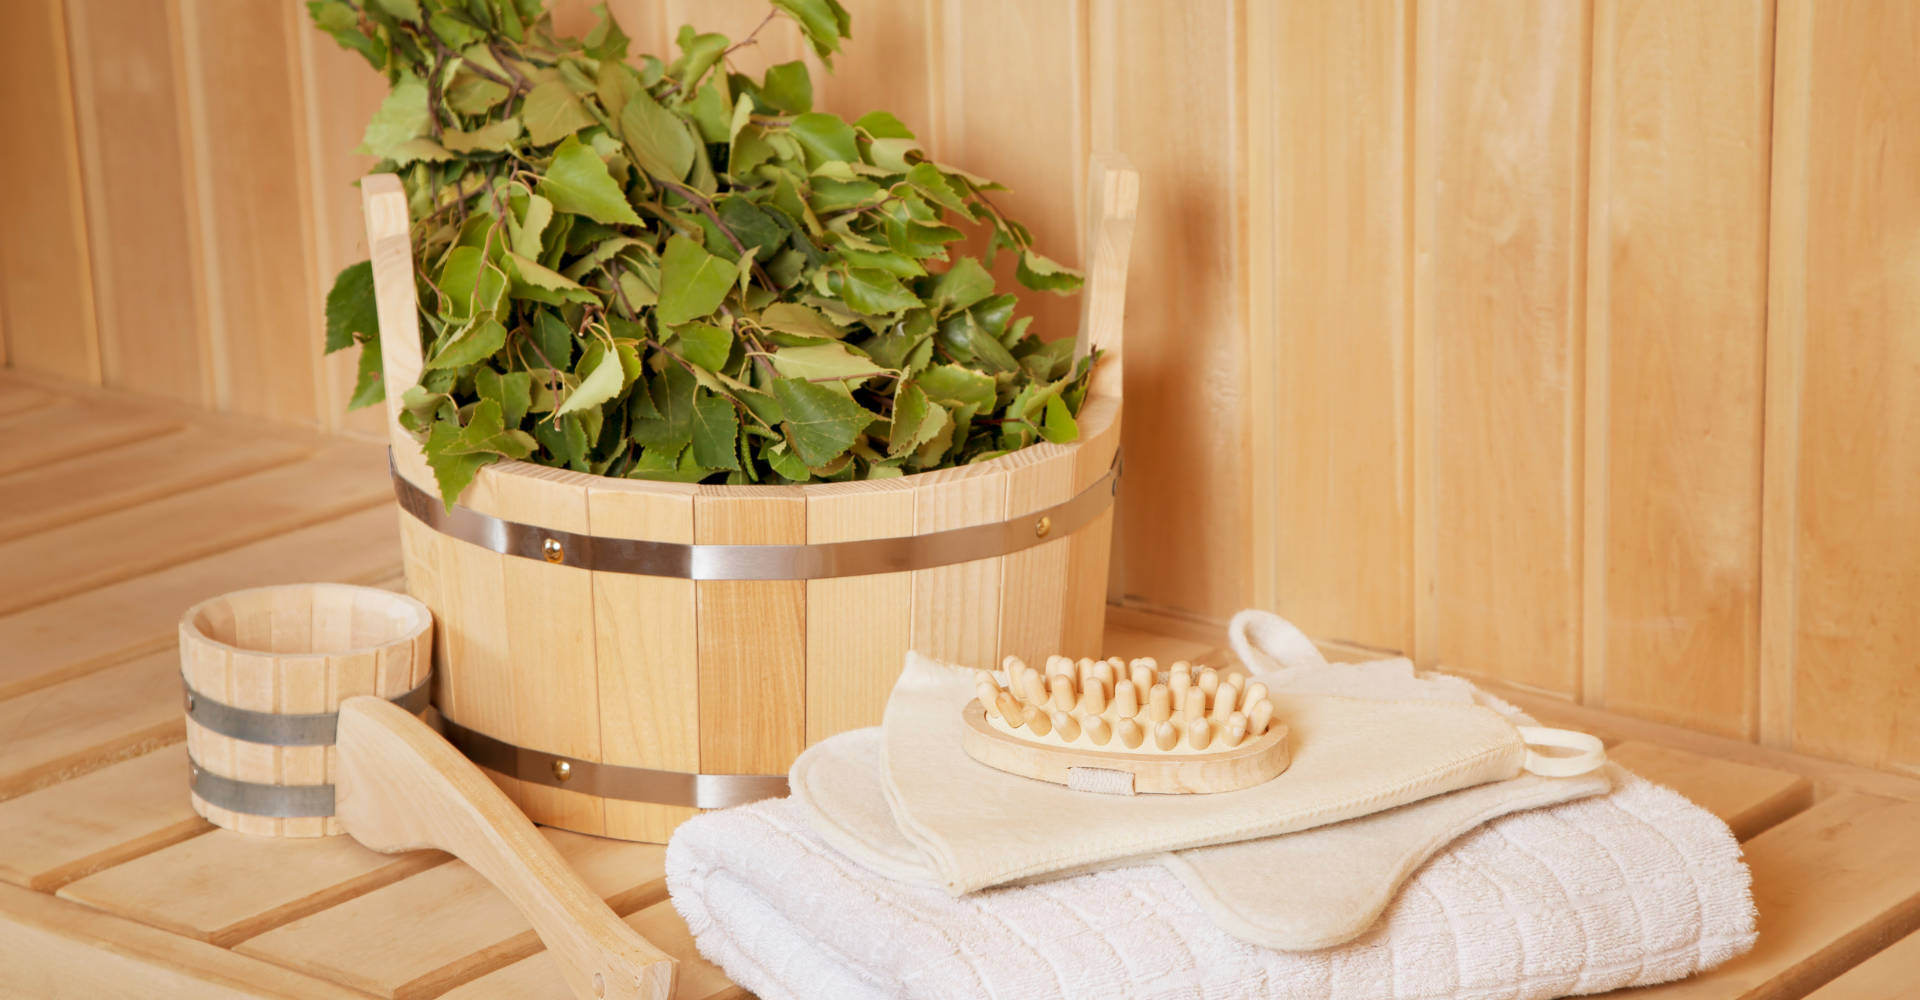 What Time Of Day Is Best To Use Your Sauna?